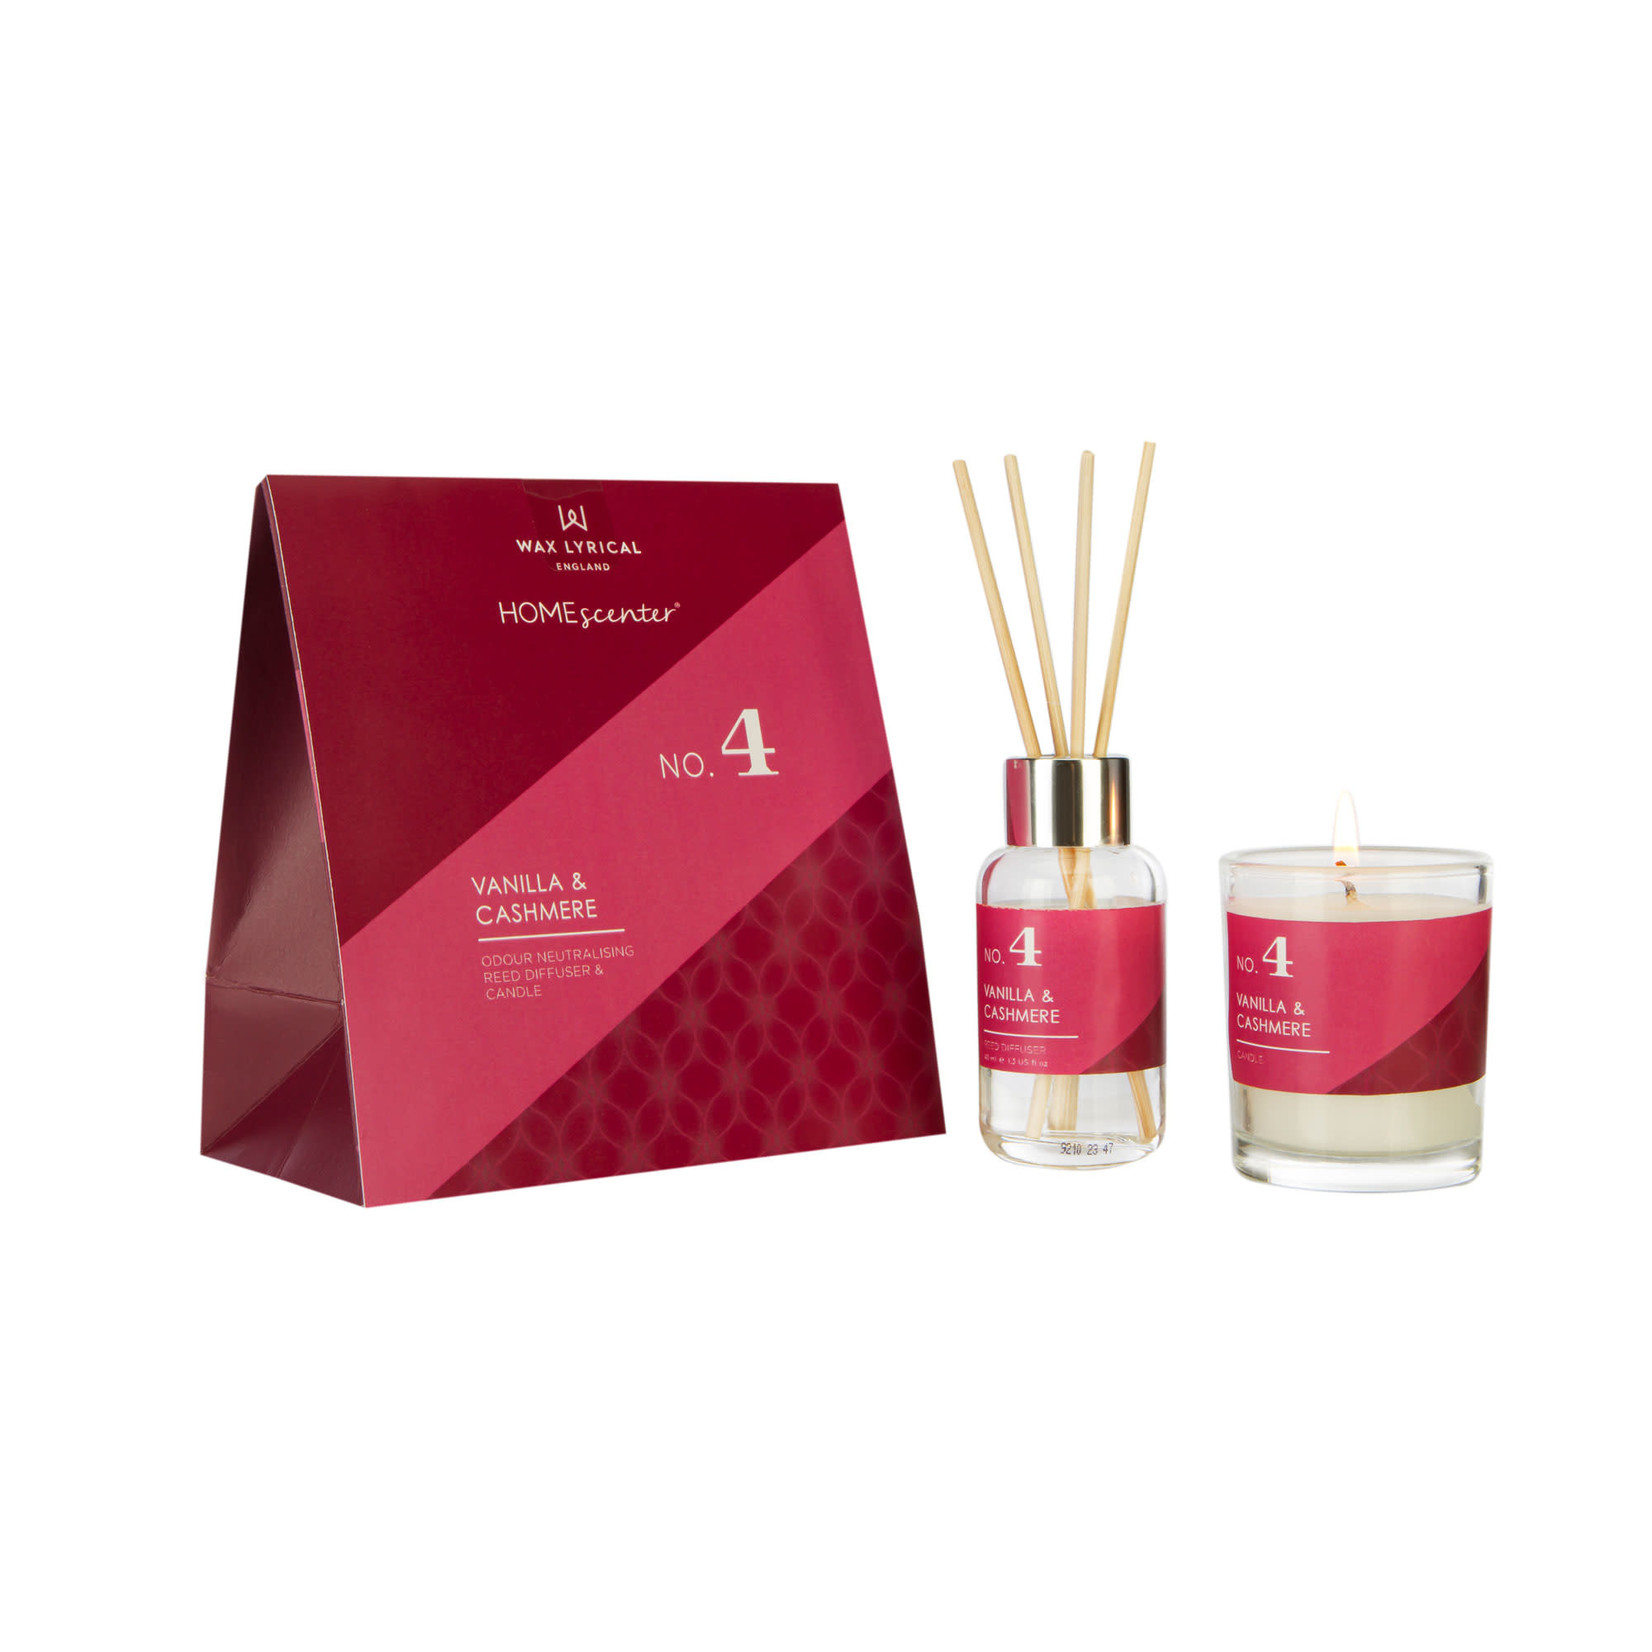 Wax Lyrical WAX LYRICAL Reed Diffuser and Candle Gift Set